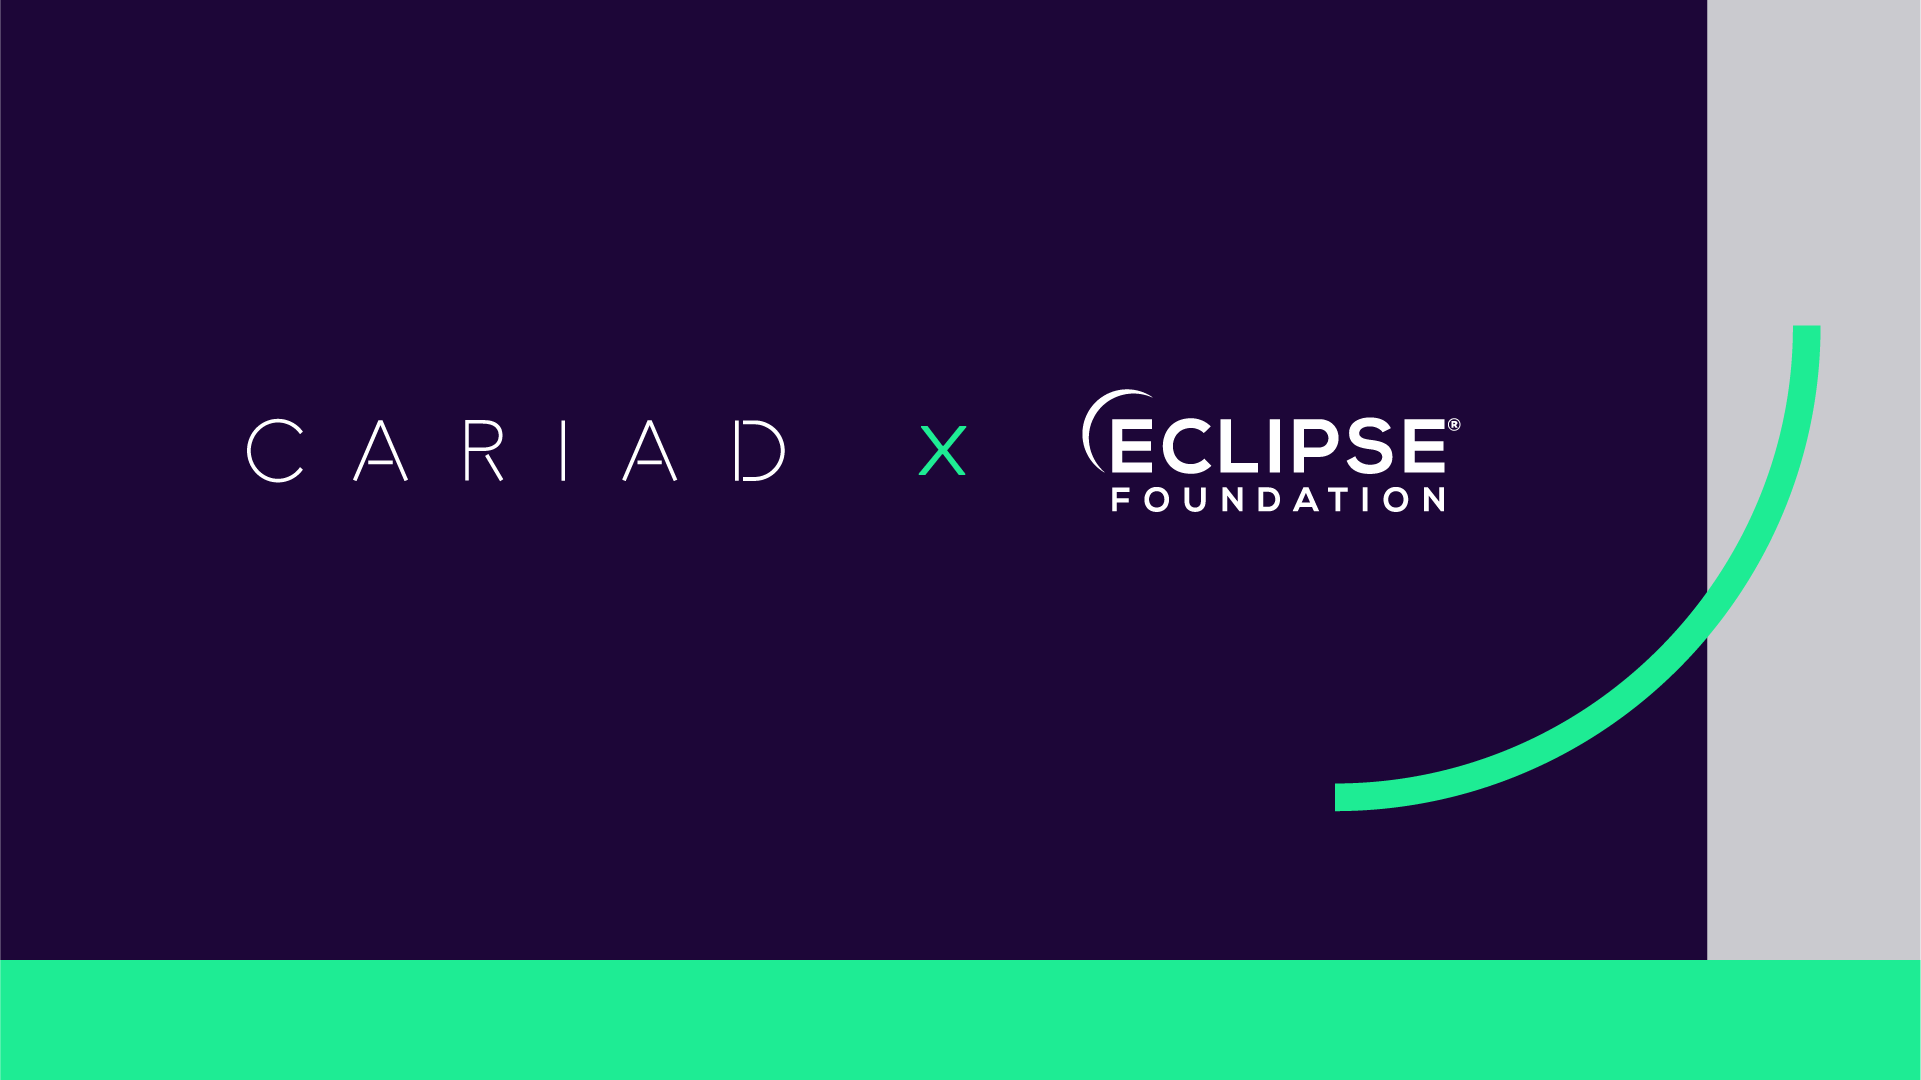 CARIAD, the automotive software company of the Volkswagen Group, has joined the Eclipse Foundation open-source community as a strategic member of the 